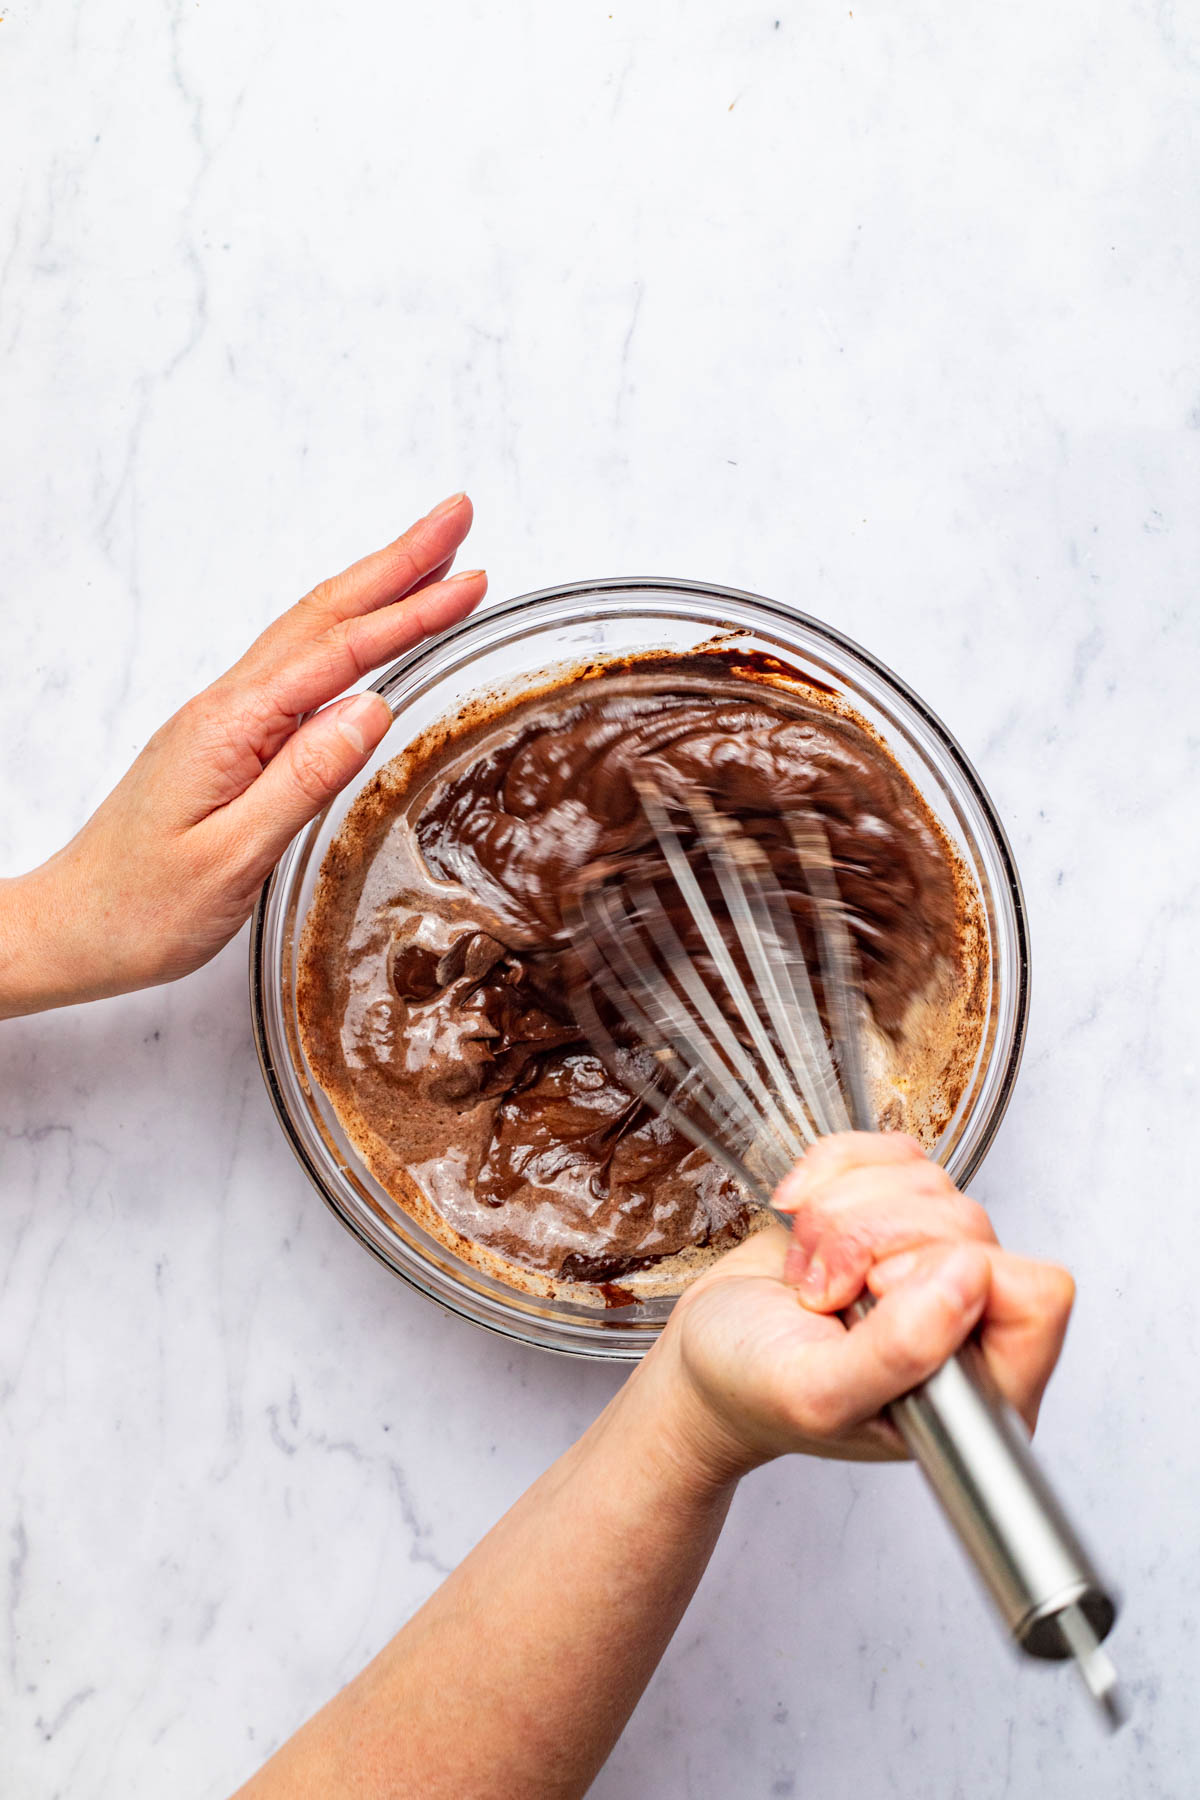 A hand using a large whisk to mix melted chocolate, butter, and cream in a glass bowl.